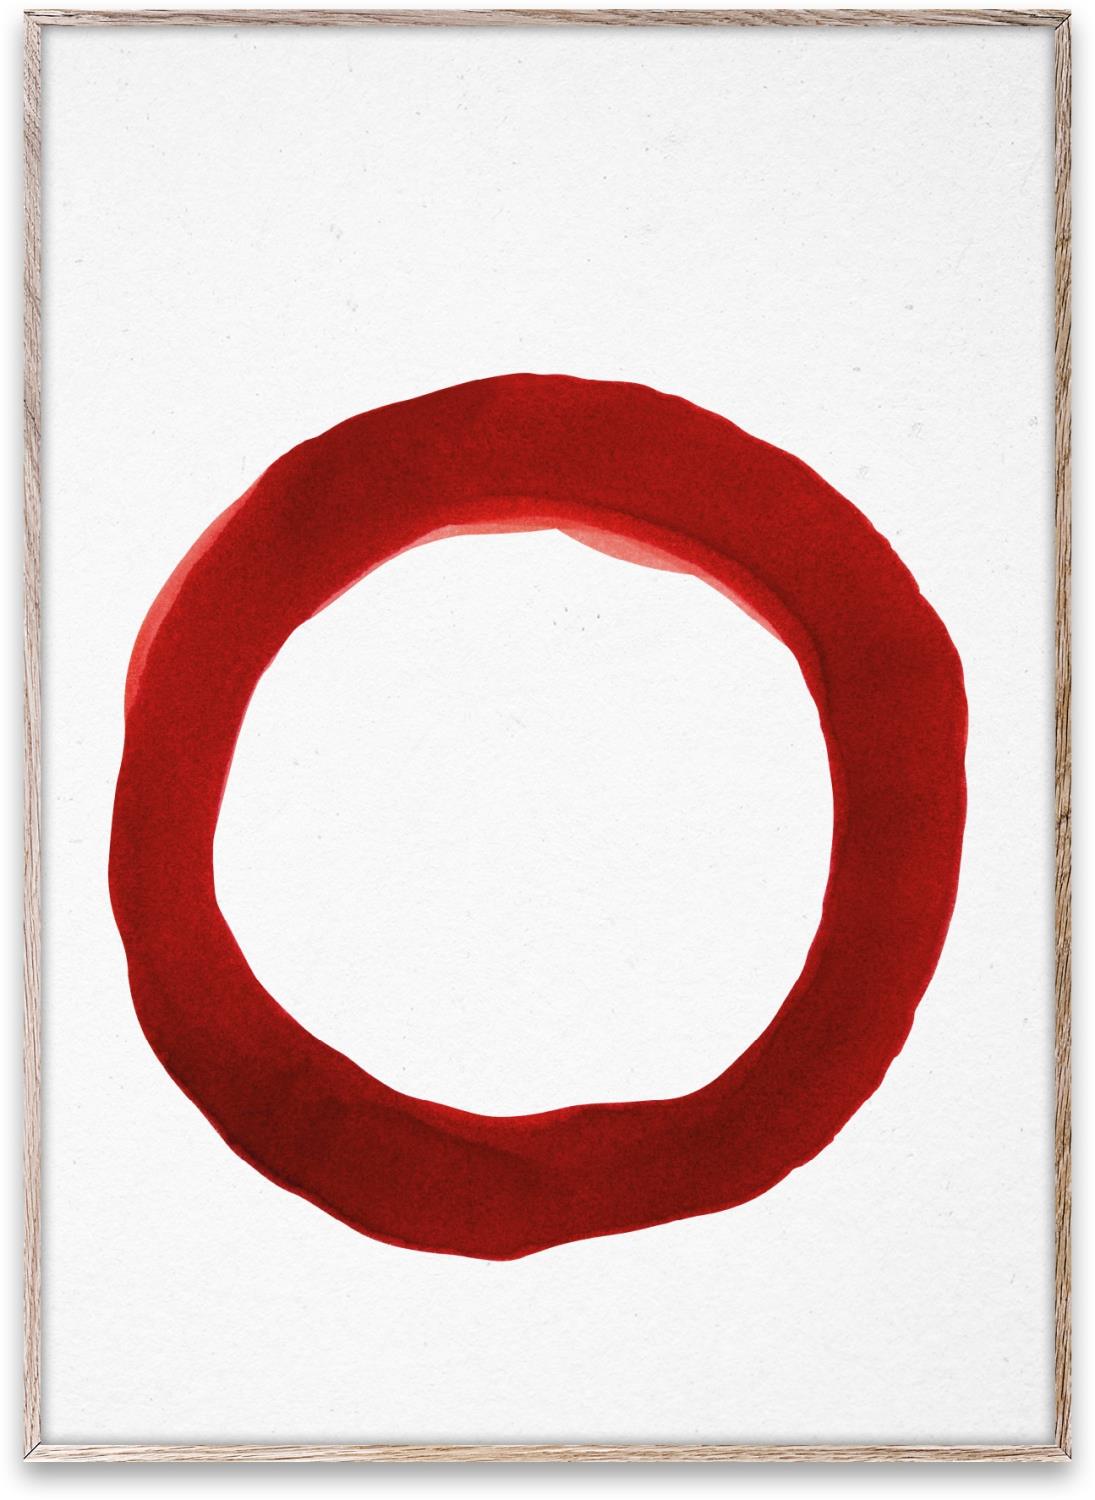 Paper Collective - Norm Architects - Enso - Red 04